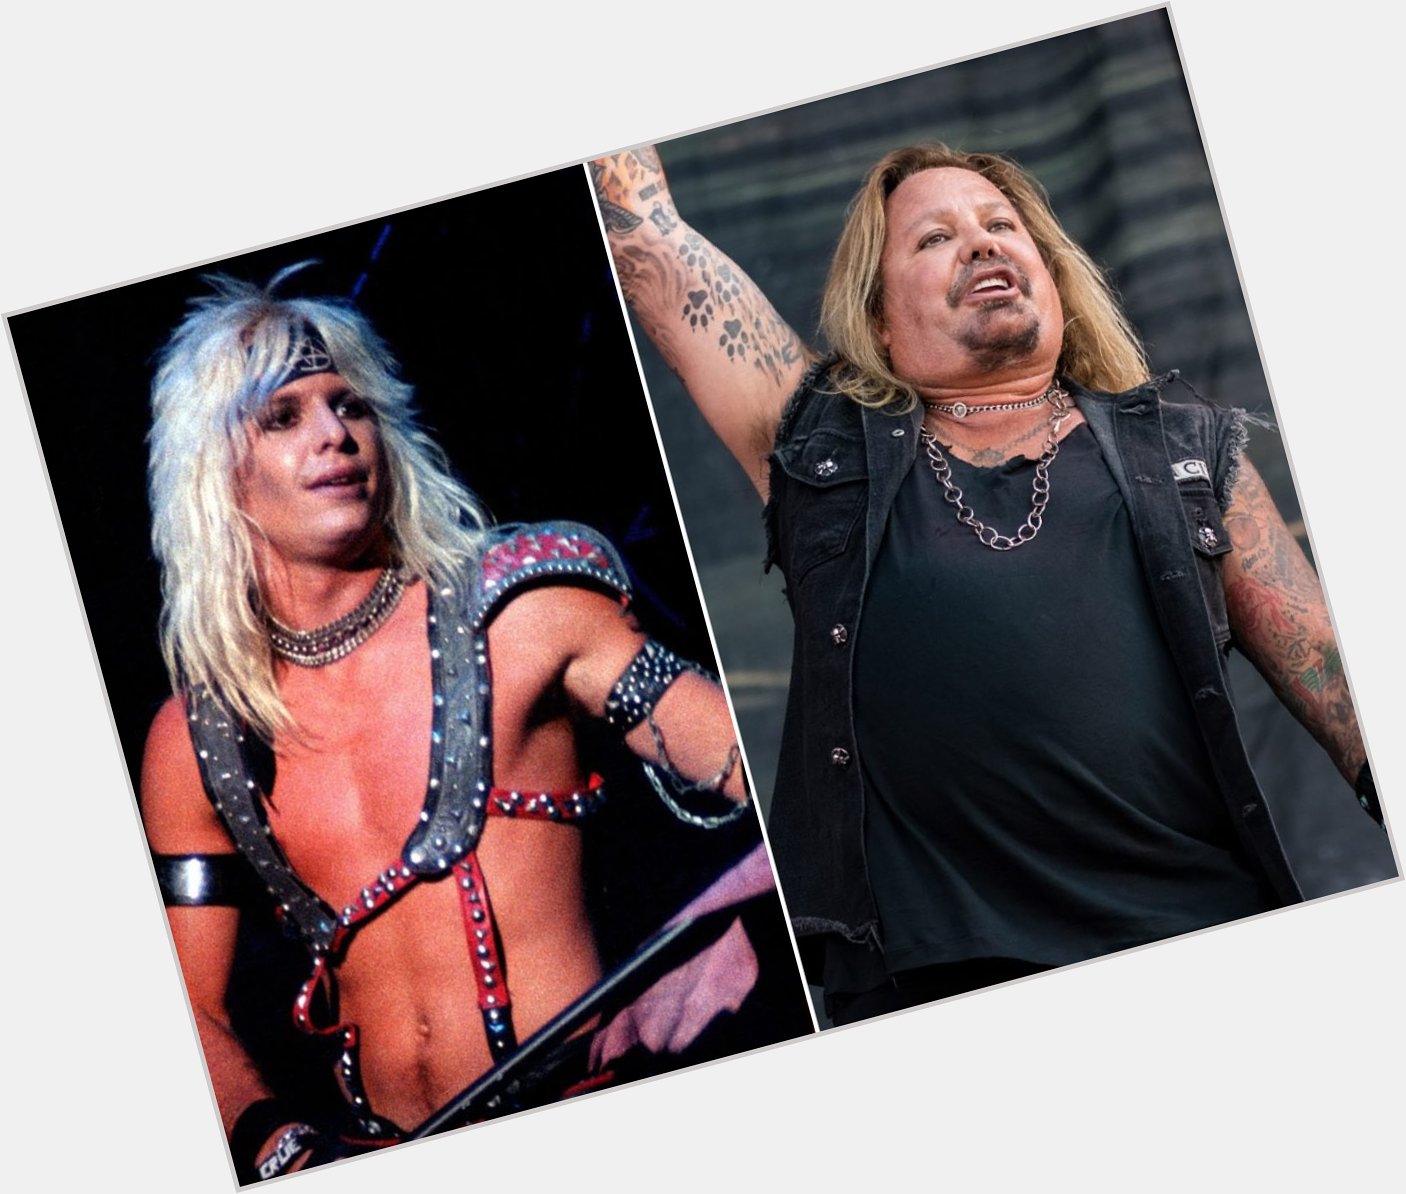 Wishing a happy 61st birthday to lead singer Vince Neil! 